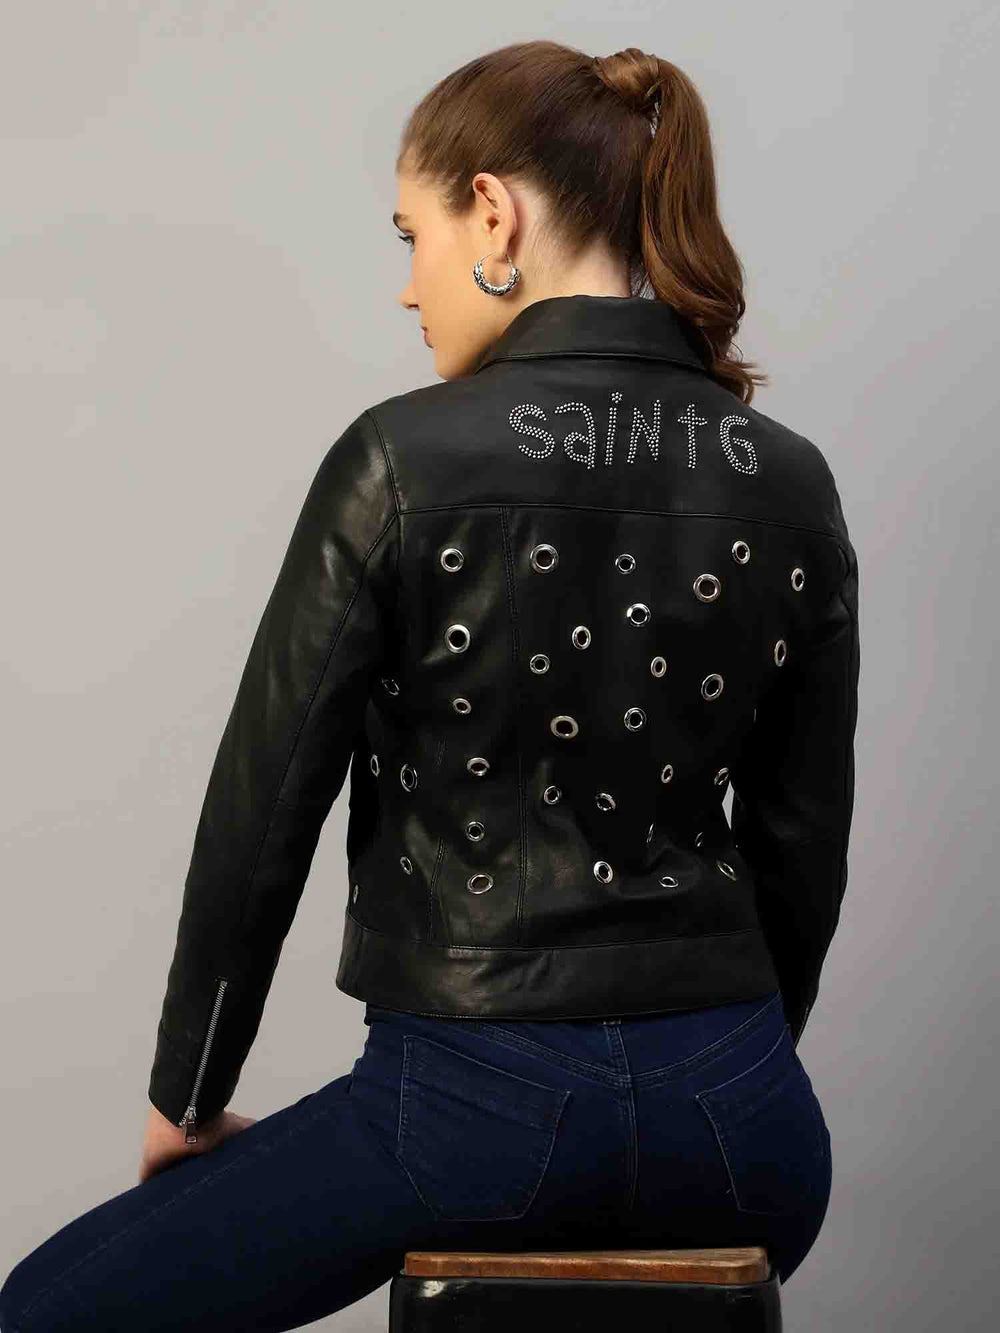 Classic Women's Leather Jacket by Saint Bryony - Sleek and Modern